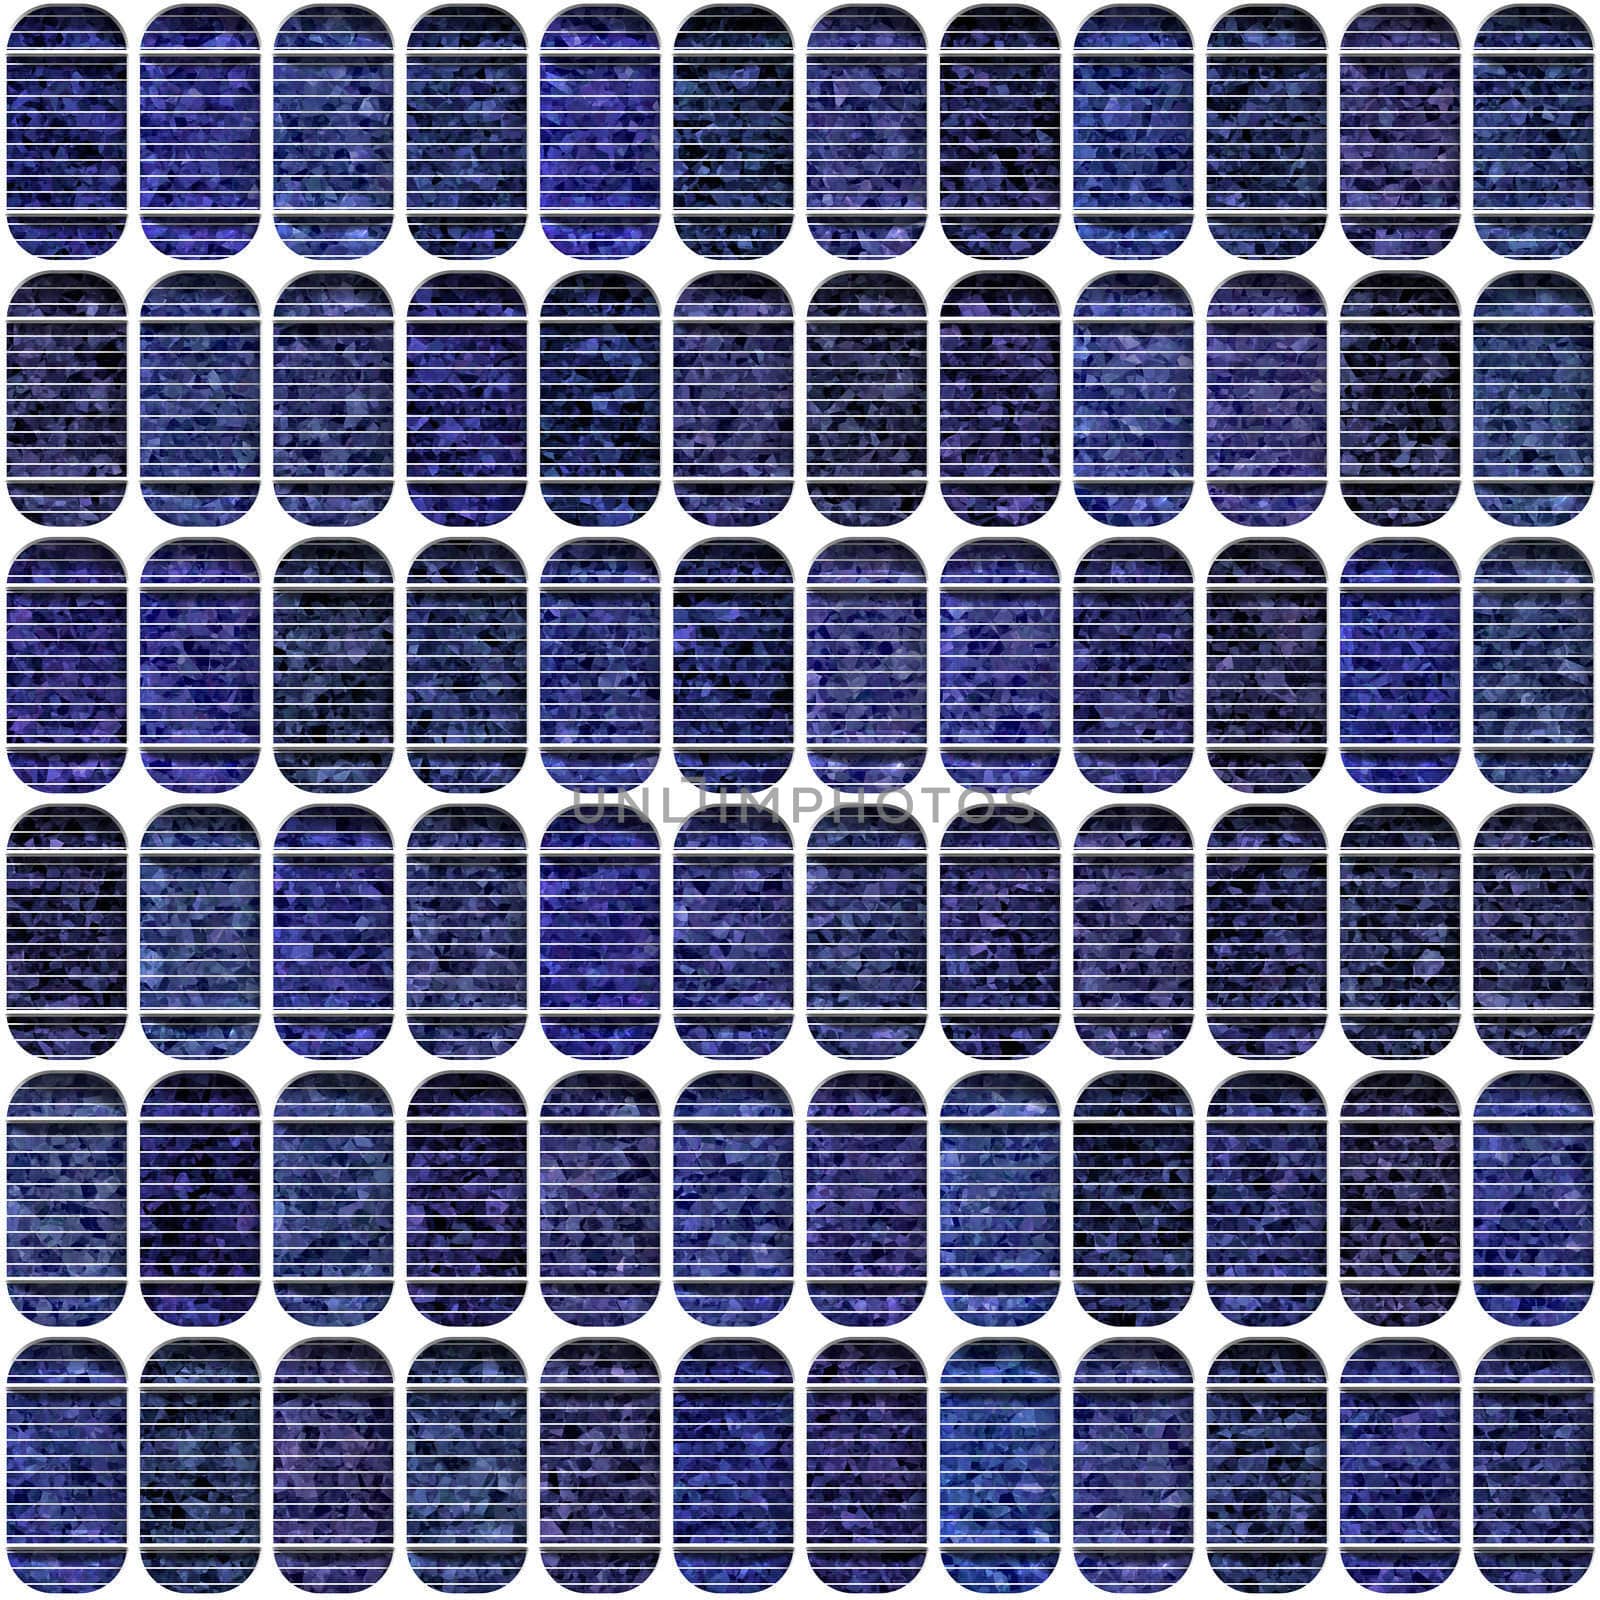 solar cells by clearviewstock